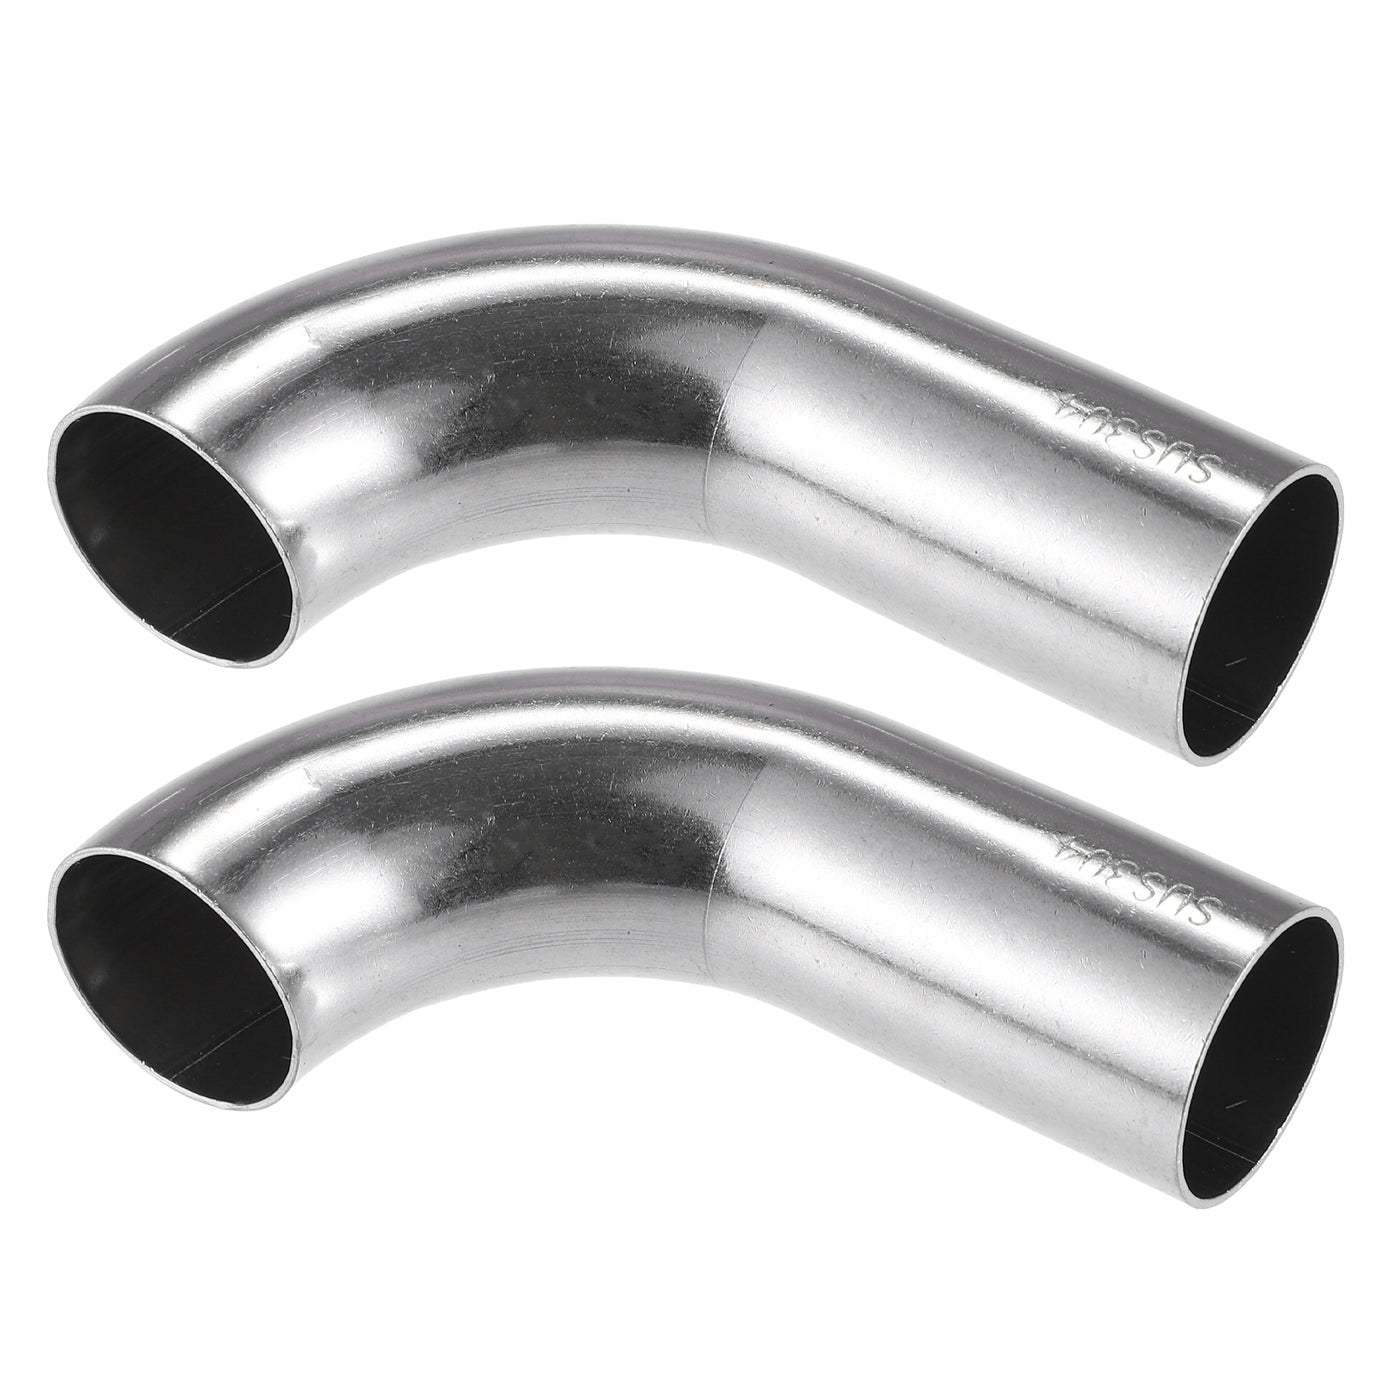 VekAuto 2 Pcs Bend Elbow Pipe Tube, 1" OD 3.43" 1.97" Leg 90 Degree DIY Exhaust Pipe Intercooler Air Intake Tube Universal for Car Truck Durable 304 Stainless Steel Silver Tone